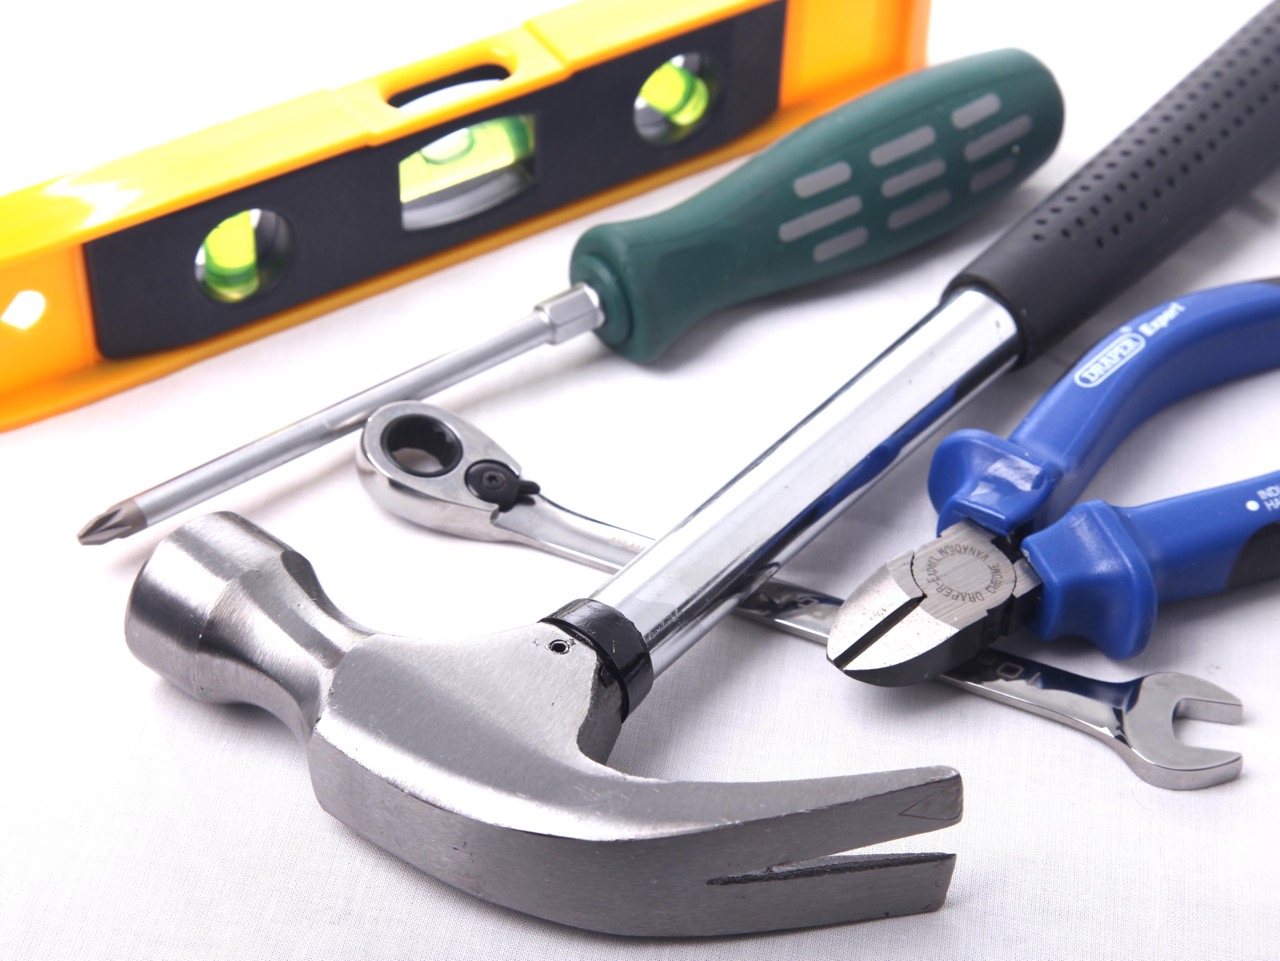 How Are Hand Tools Classified?